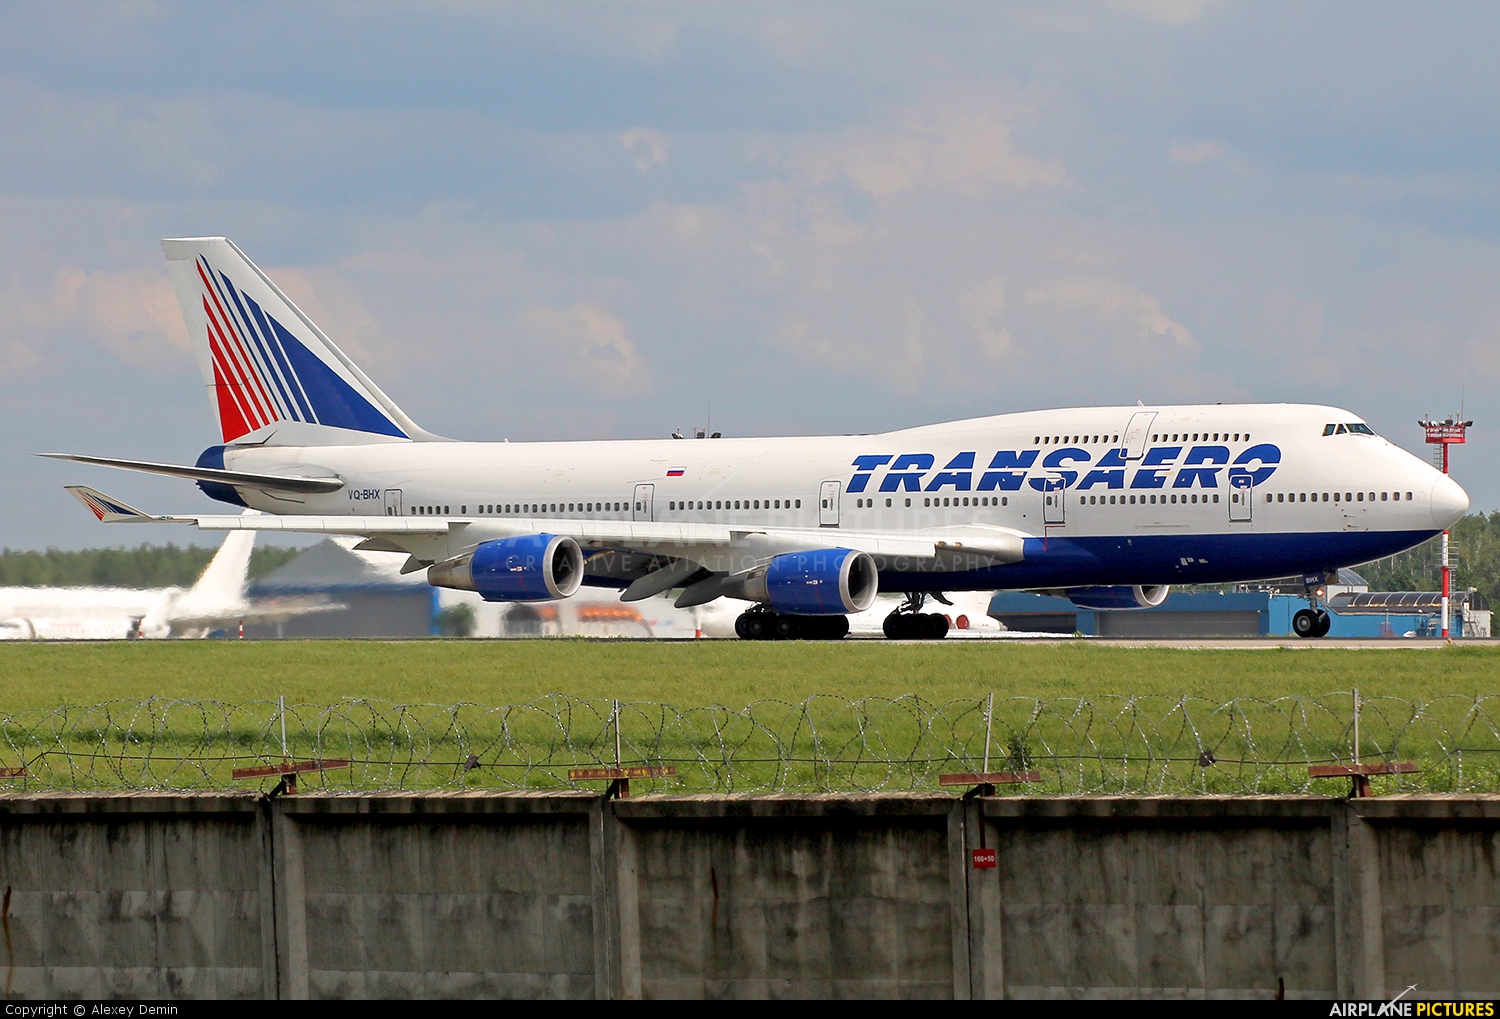 Transaero Airlines VQ-BHX aircraft at Moscow - Domodedovo